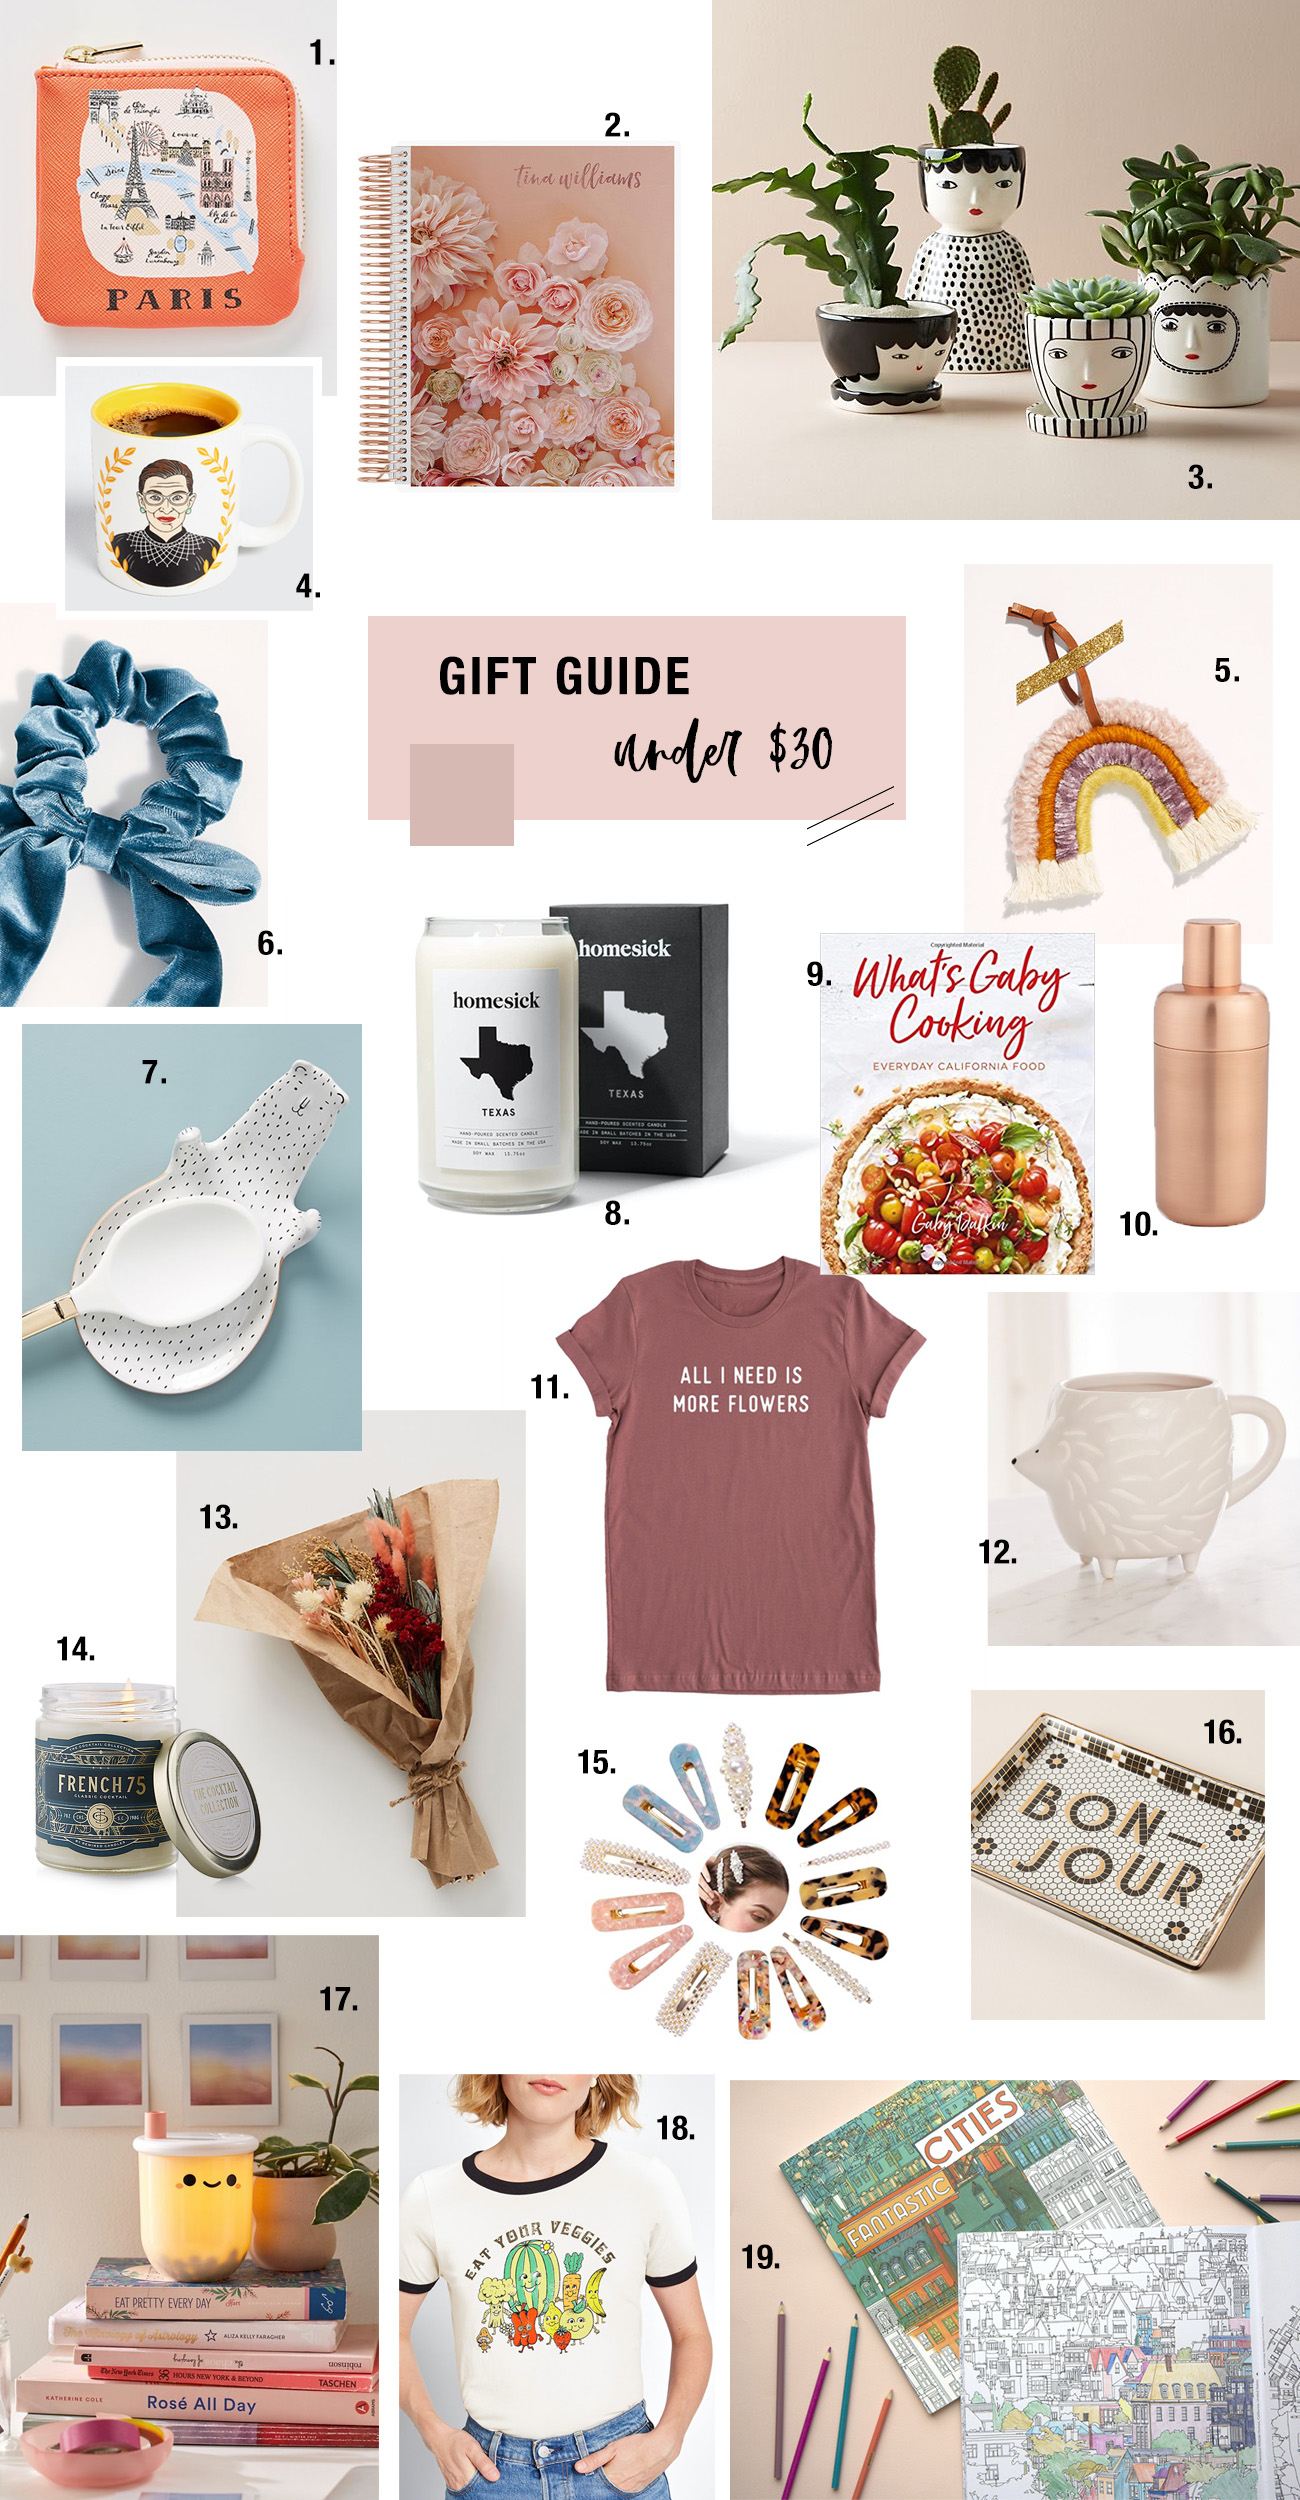 2019 Gift Guide for Gifts Under $30